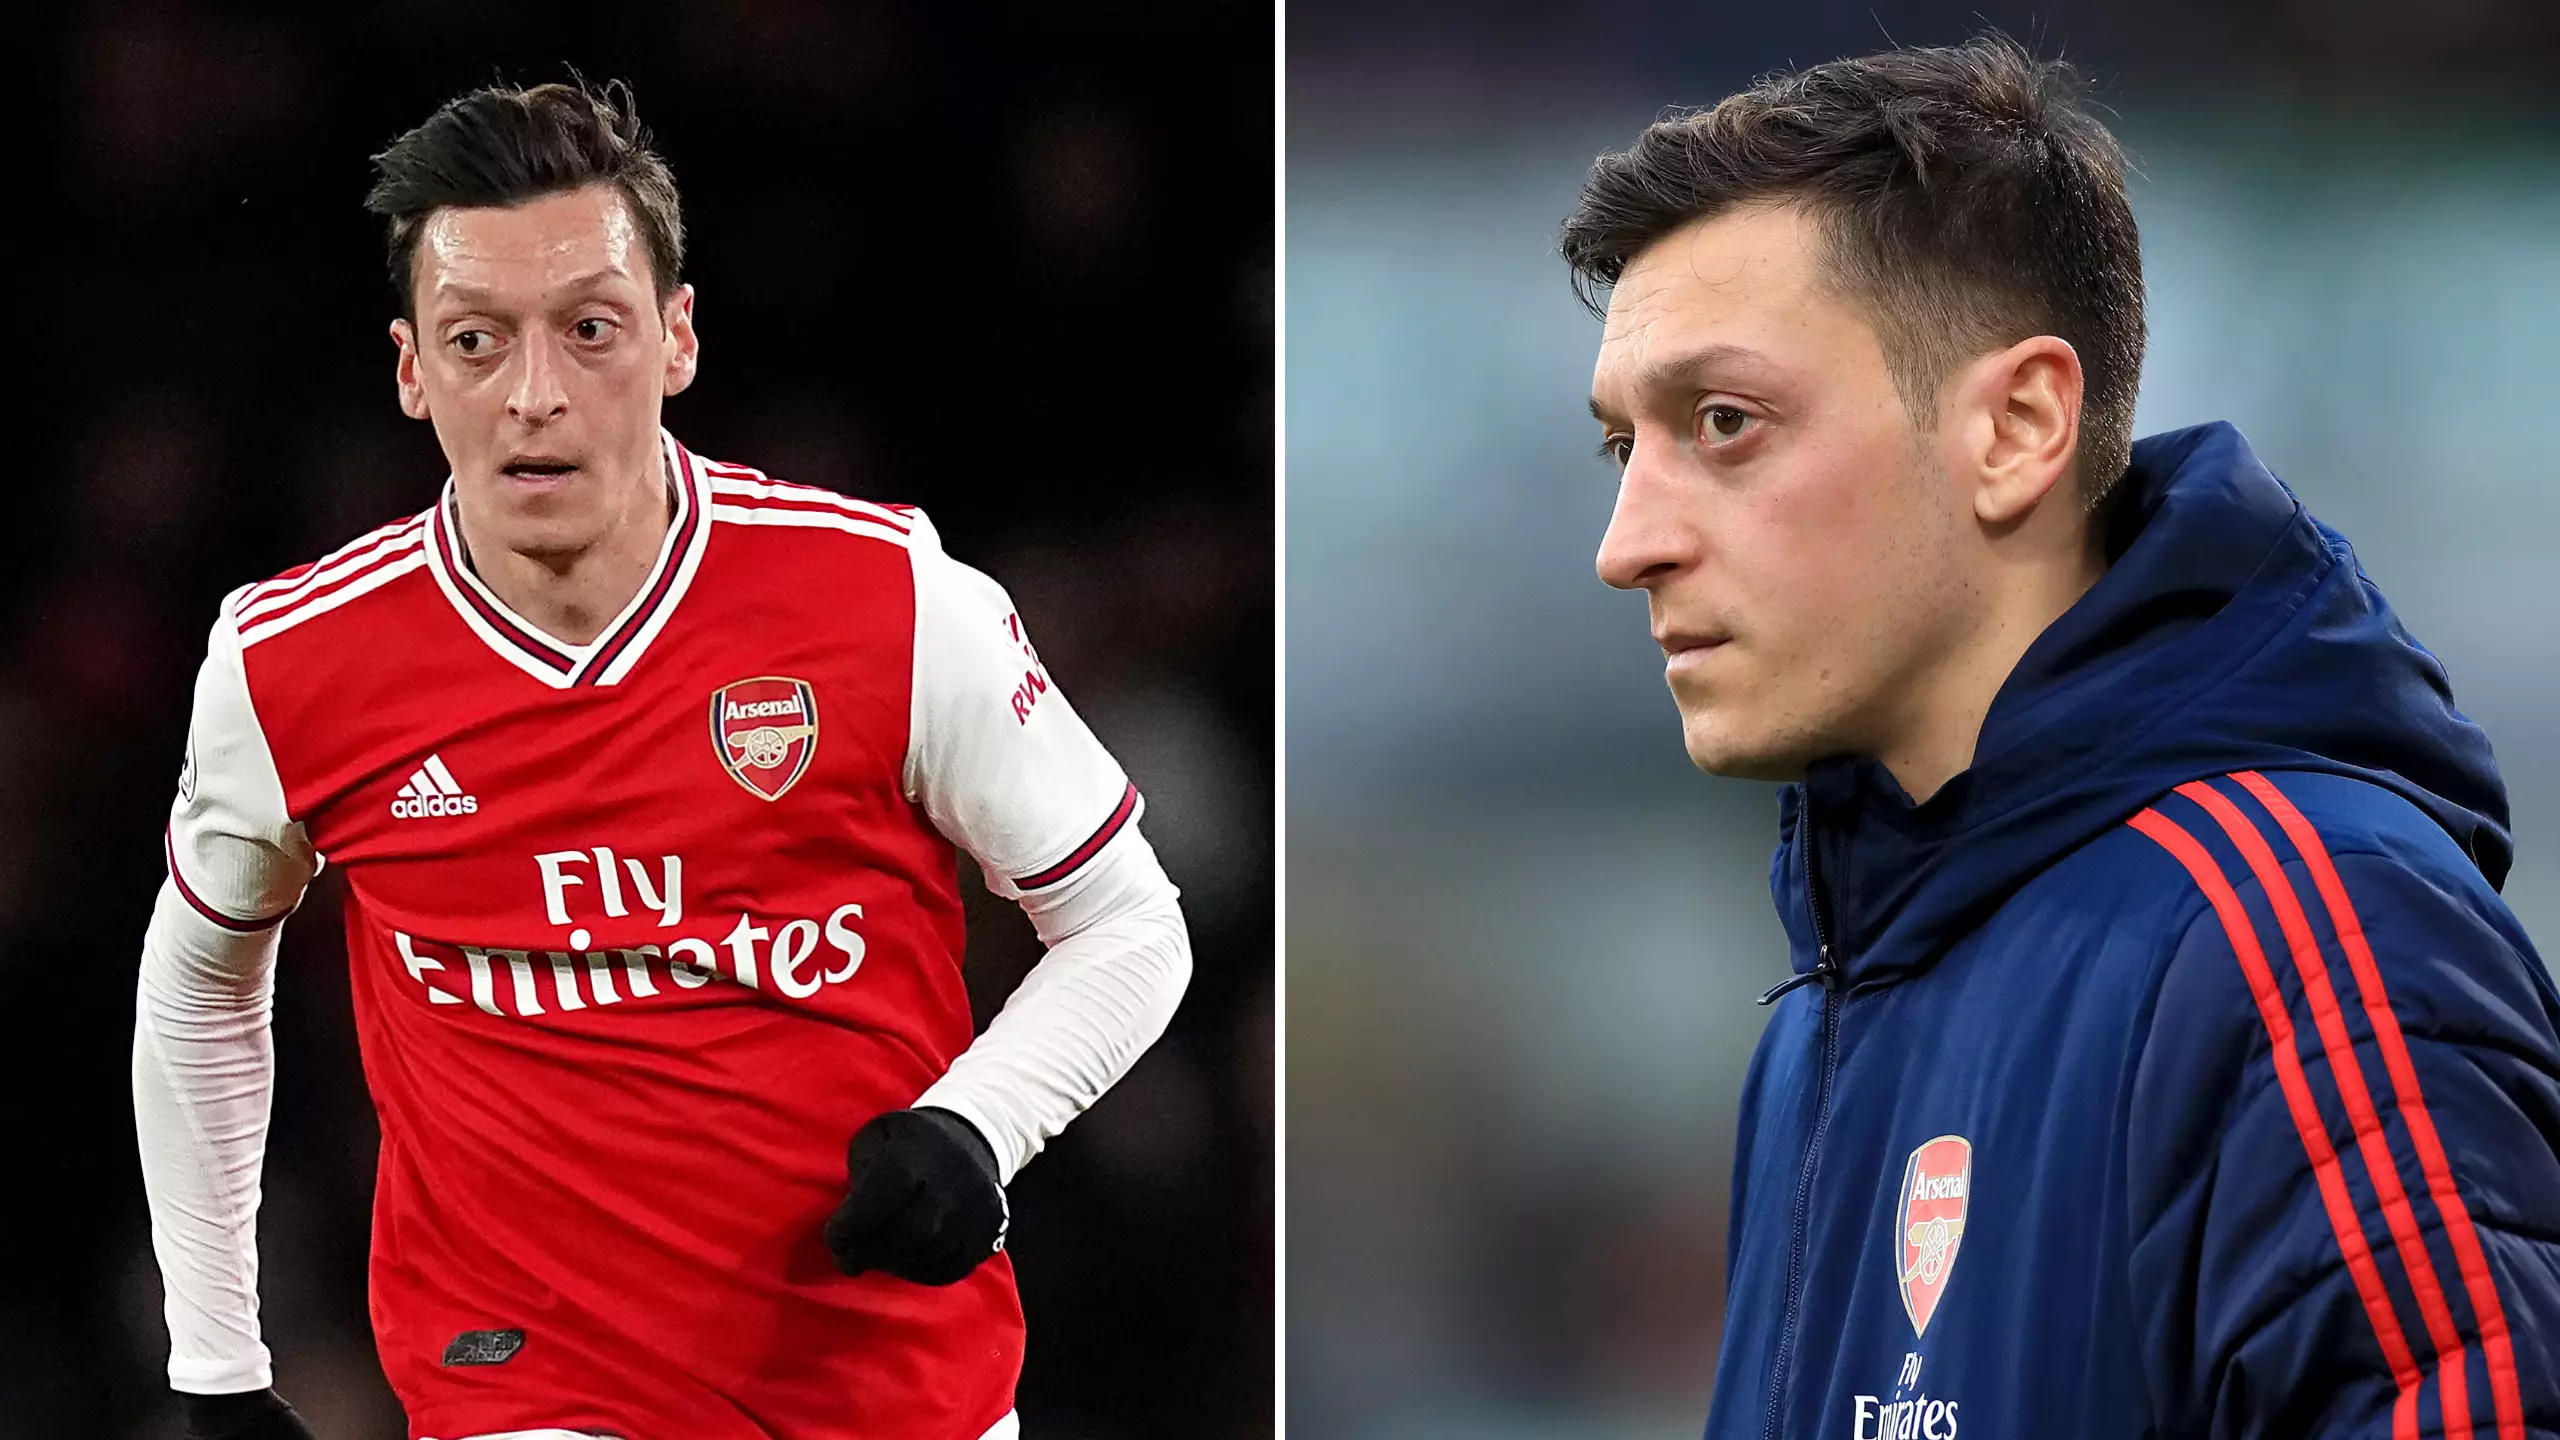 Mesut Ozil "To Be Left Out" Of Arsenal's Premier League Squad Despite Earning £350,000-Per-Week